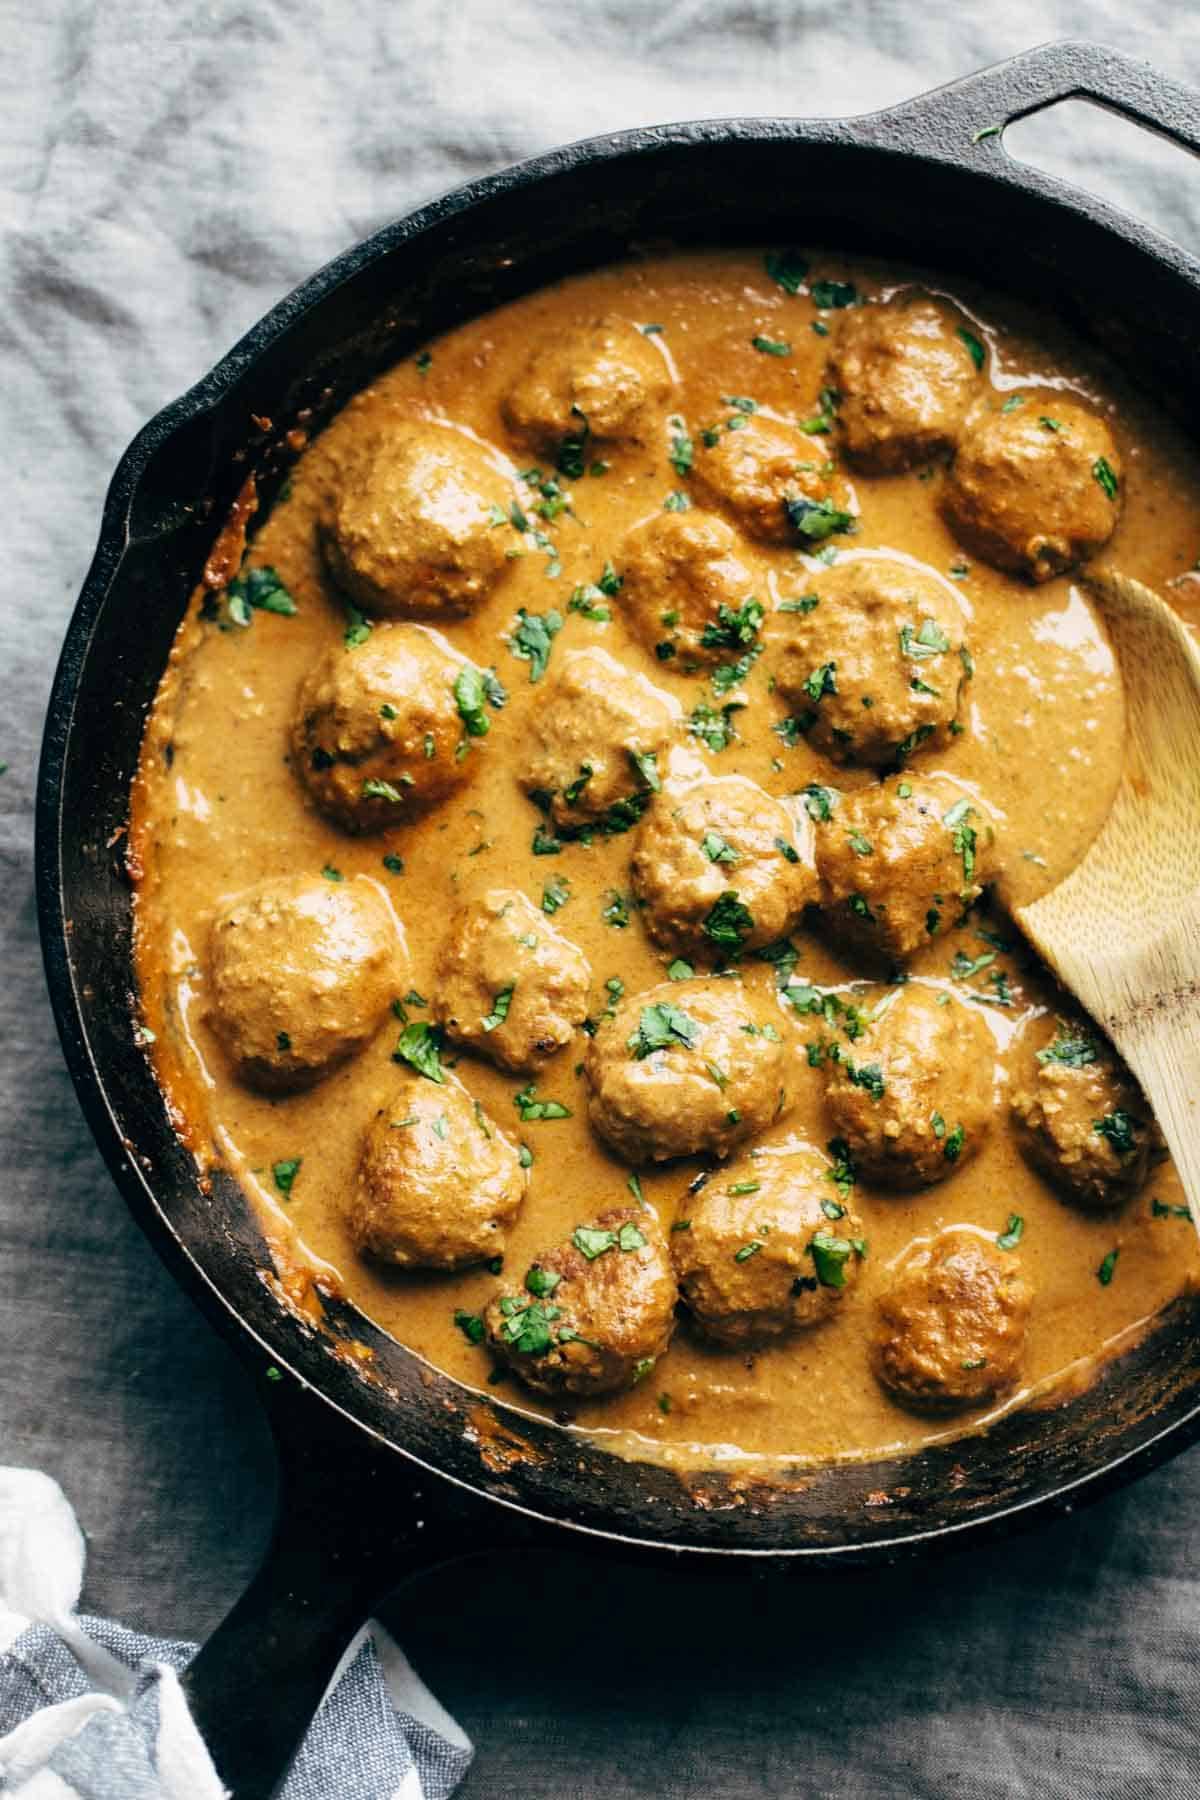 Meatless meatballs in a pan with sauce with wooden spoon.